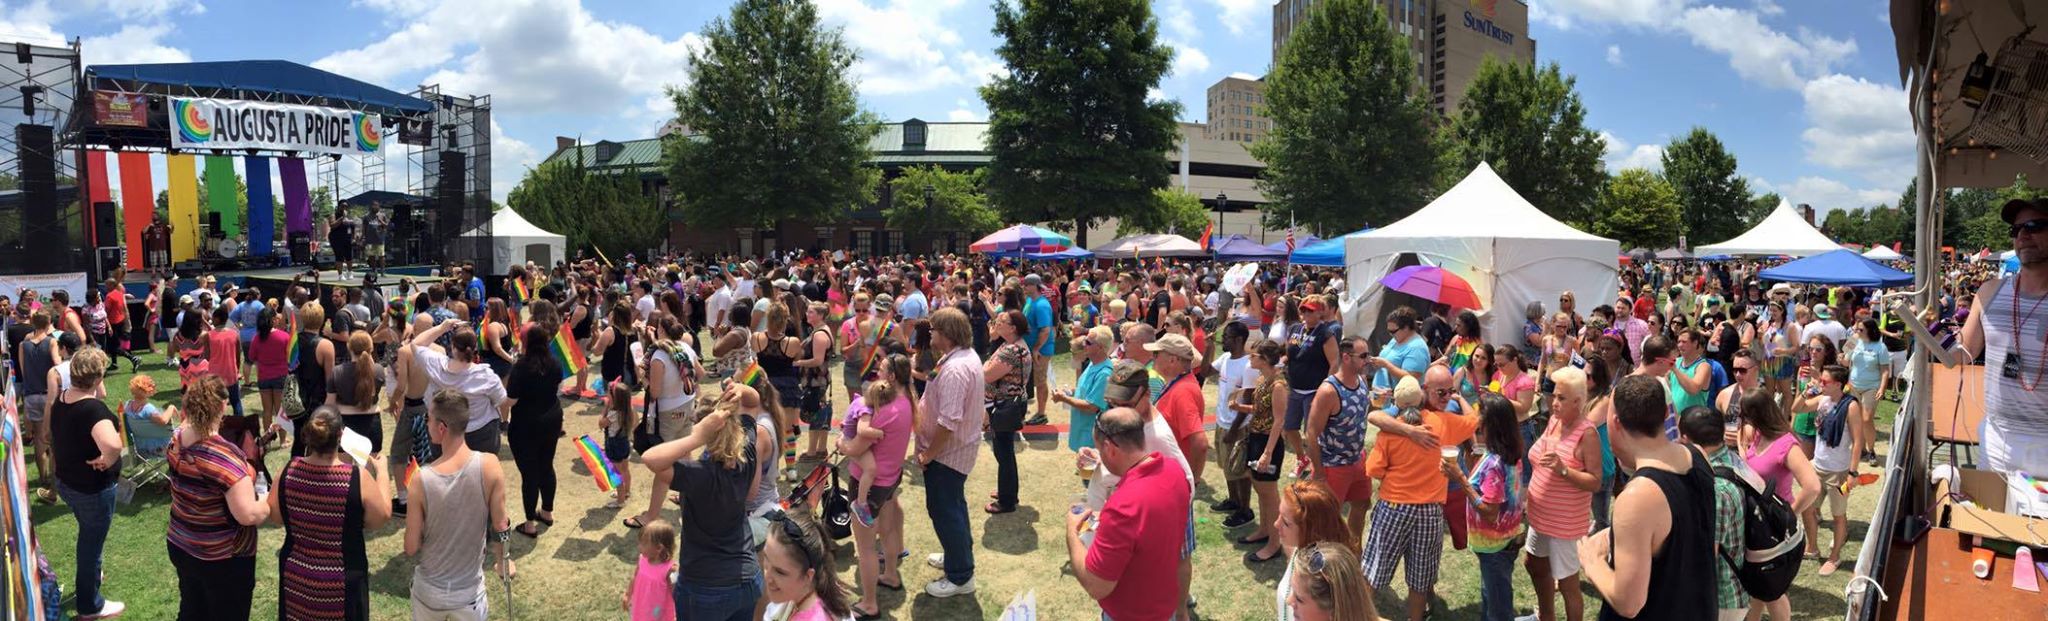 Background photo of Augusta Pride Festival with stage and attendees